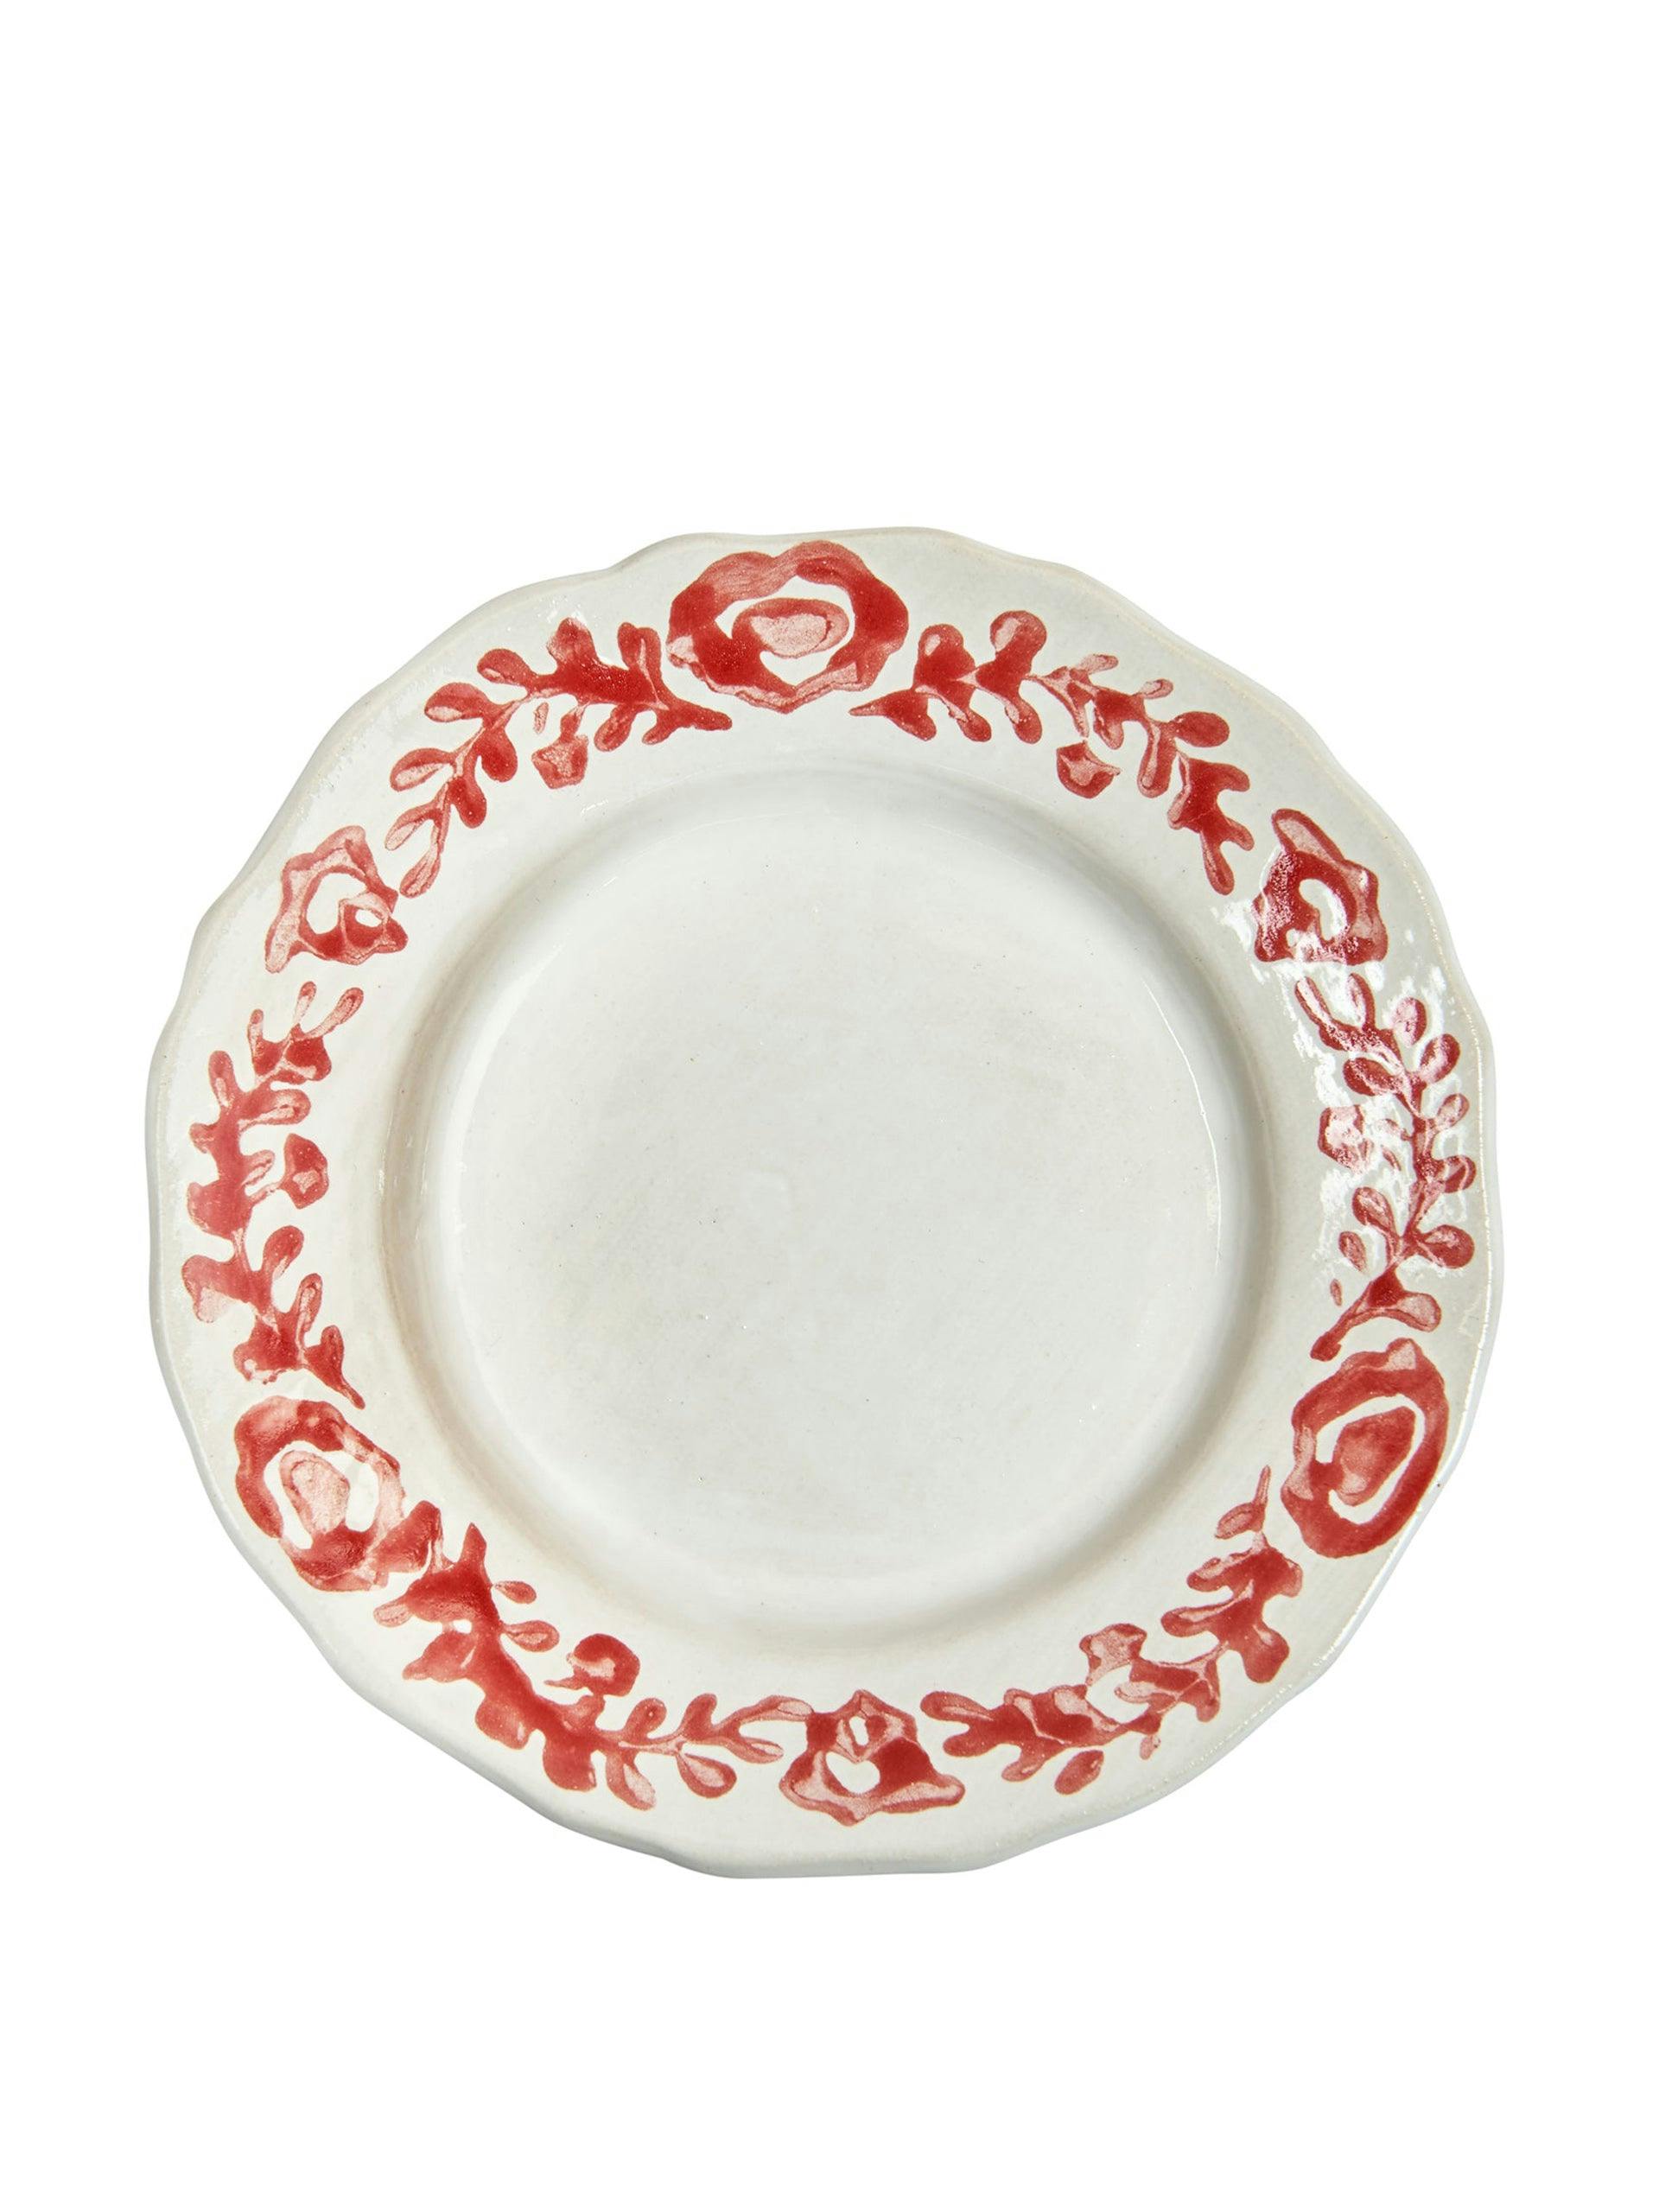 Handmade plates with floral print